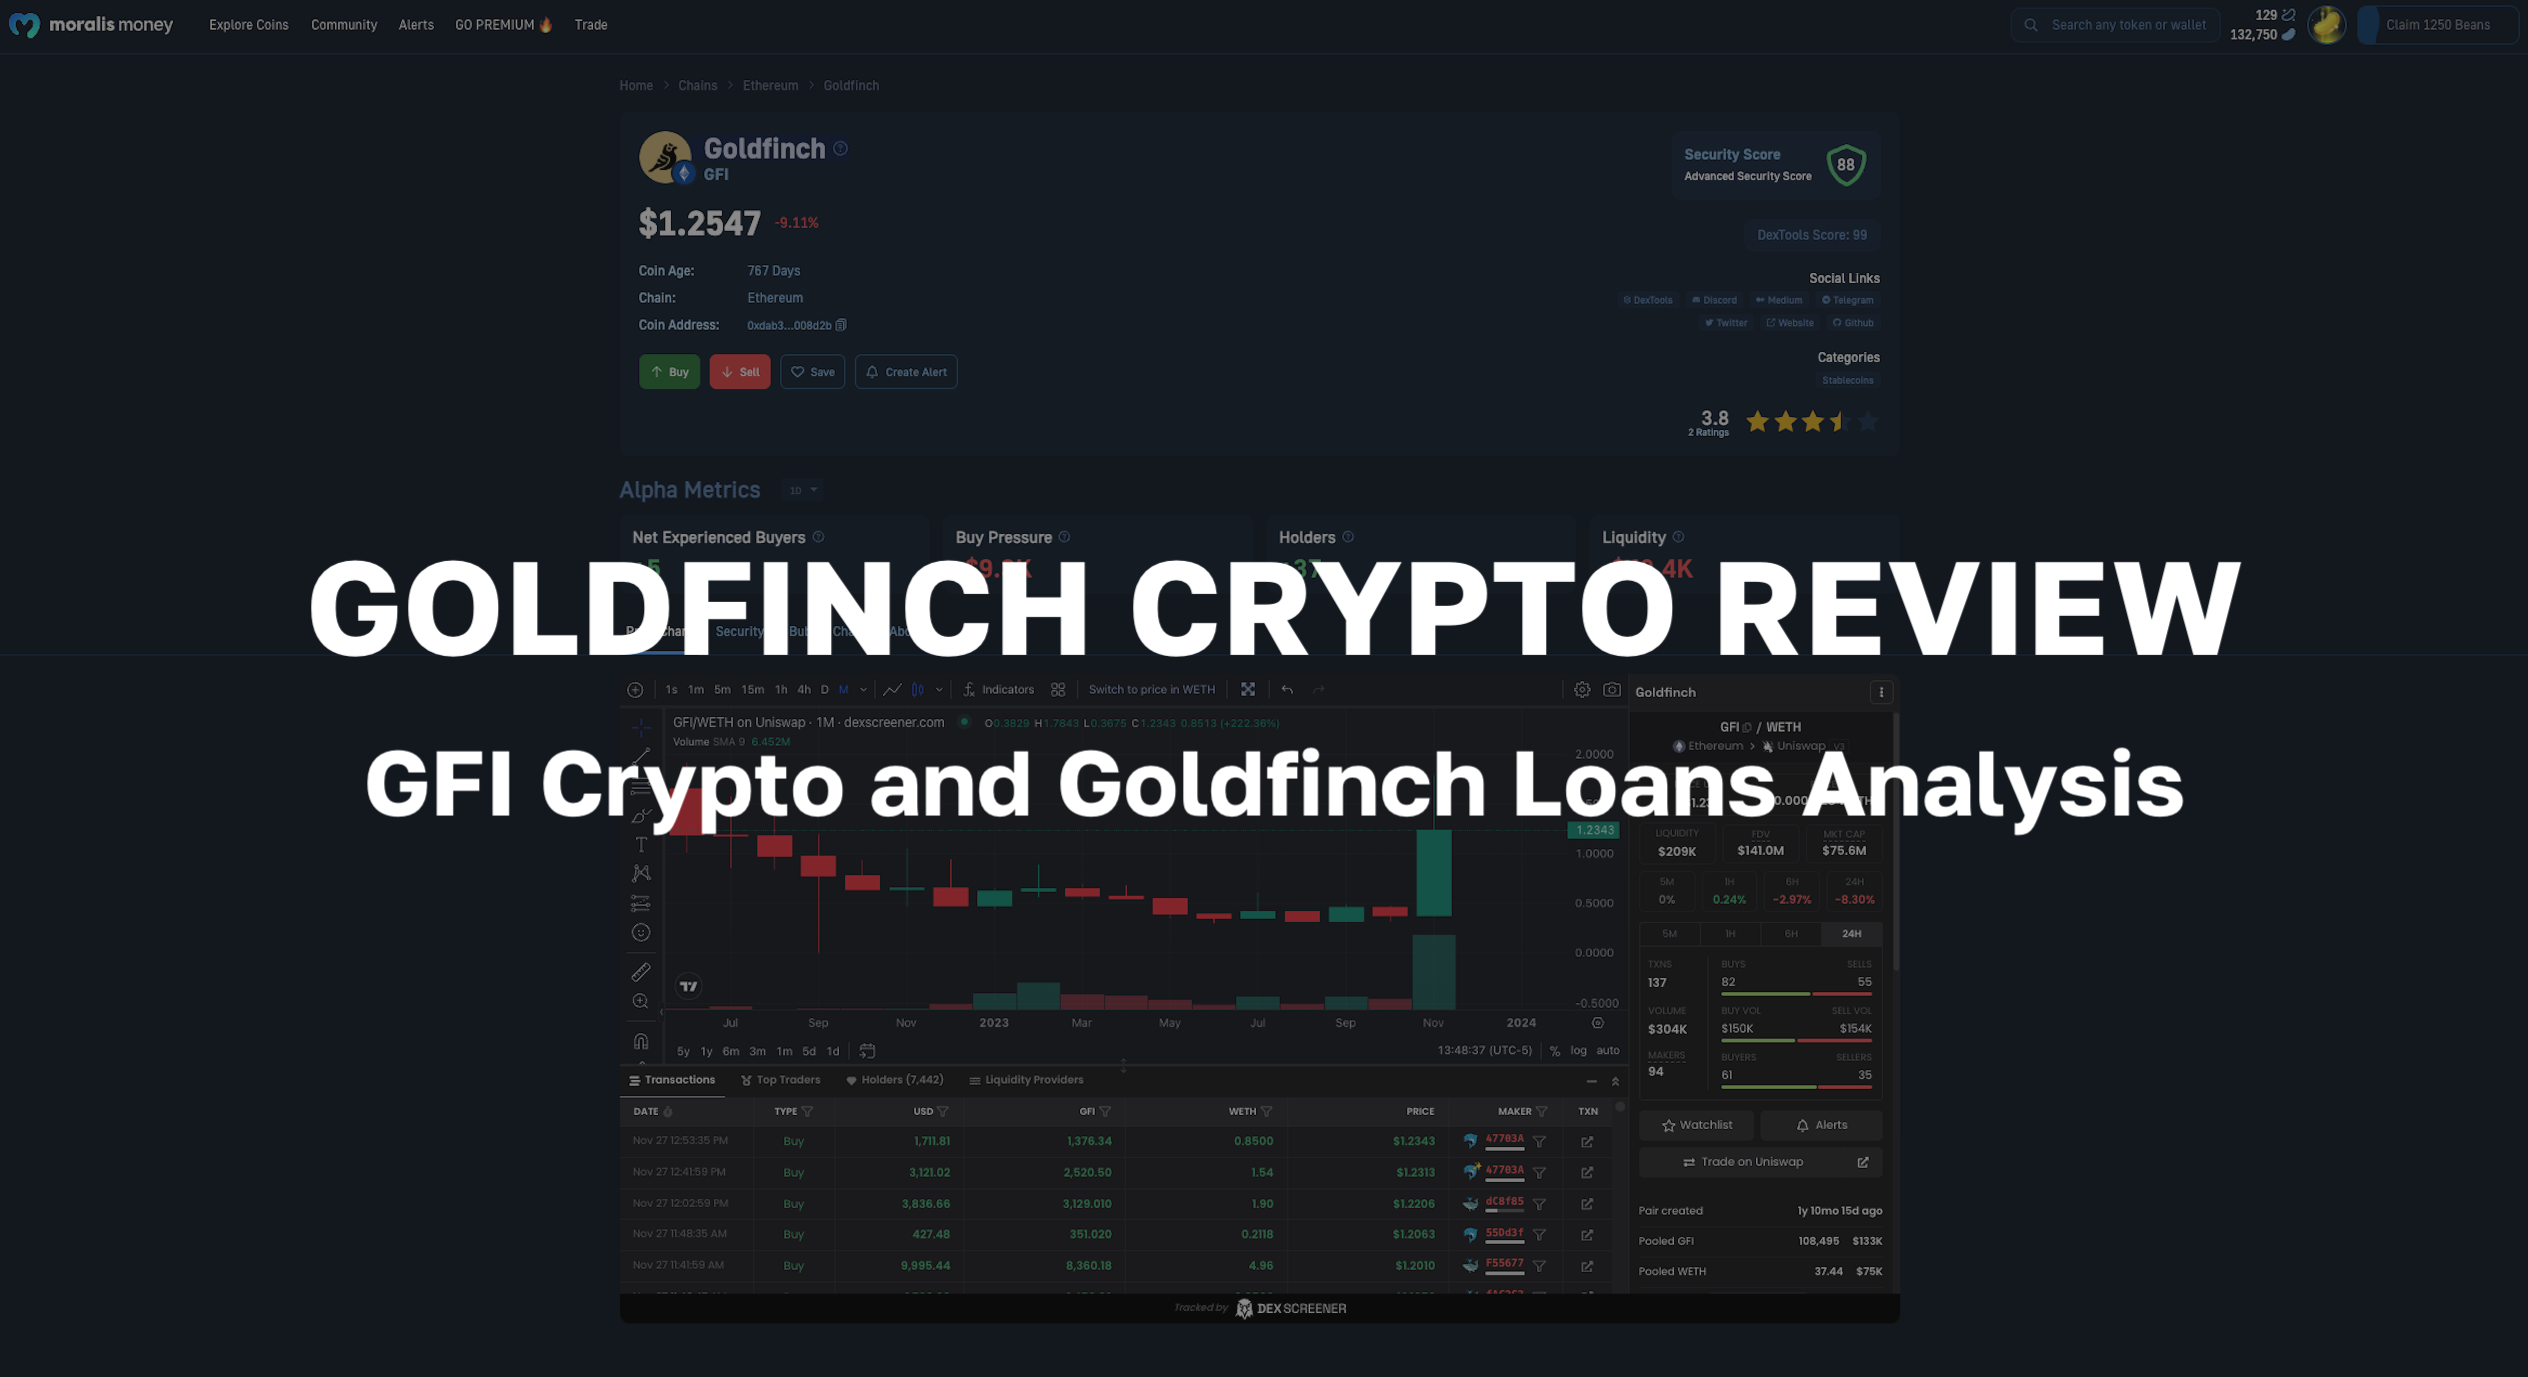 Goldfinch Crypto Review - GFI Crypto and Goldfinch Loans Analysis